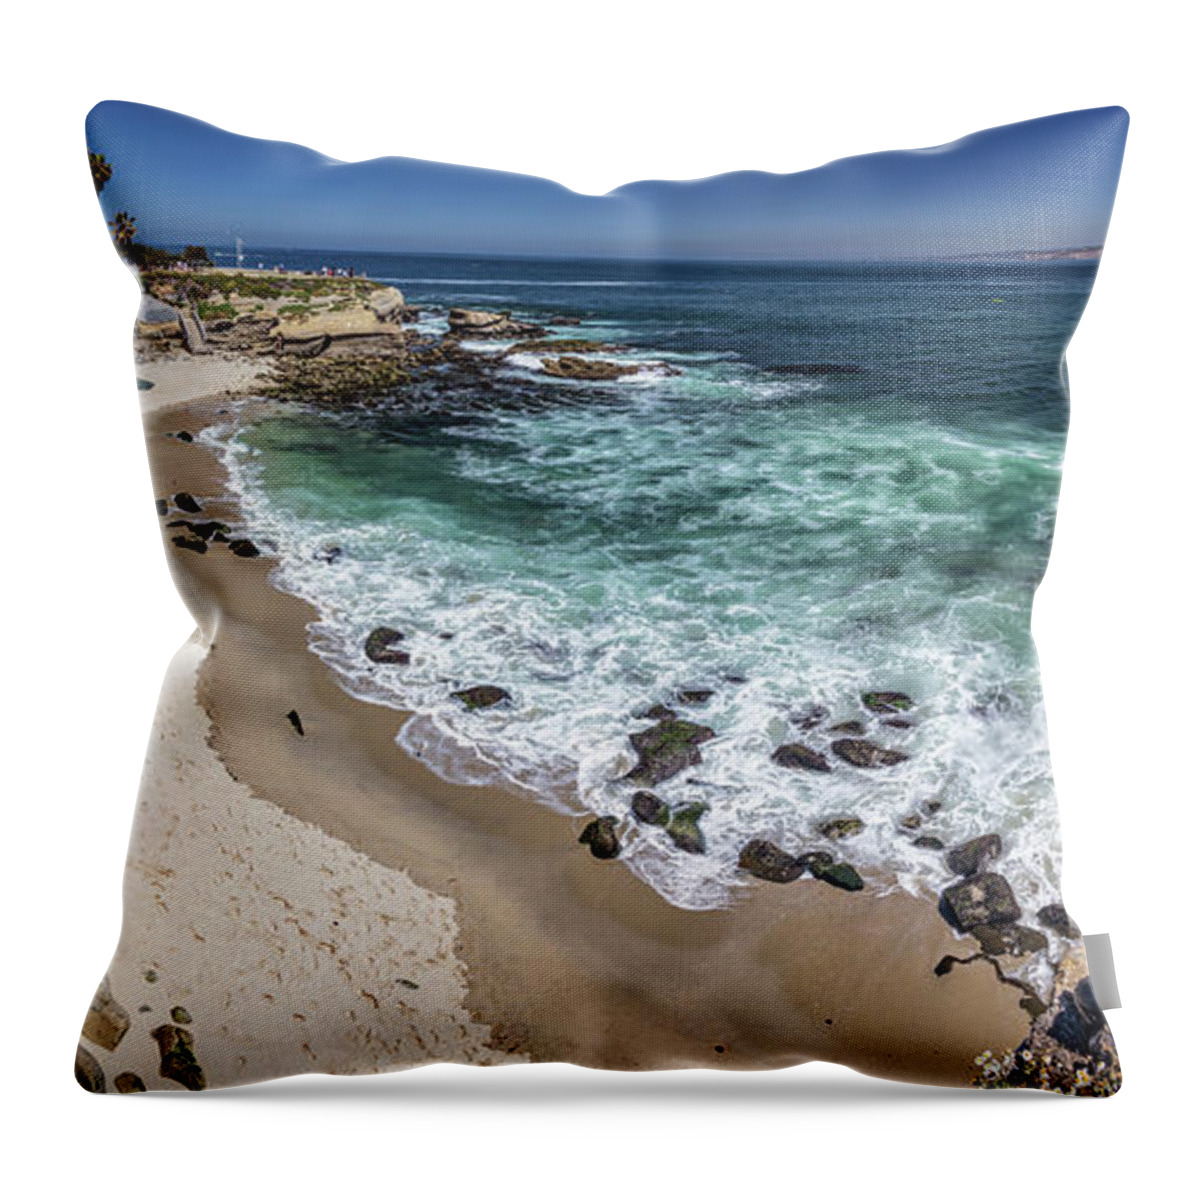 Aqua Throw Pillow featuring the photograph The Cove by Peter Tellone